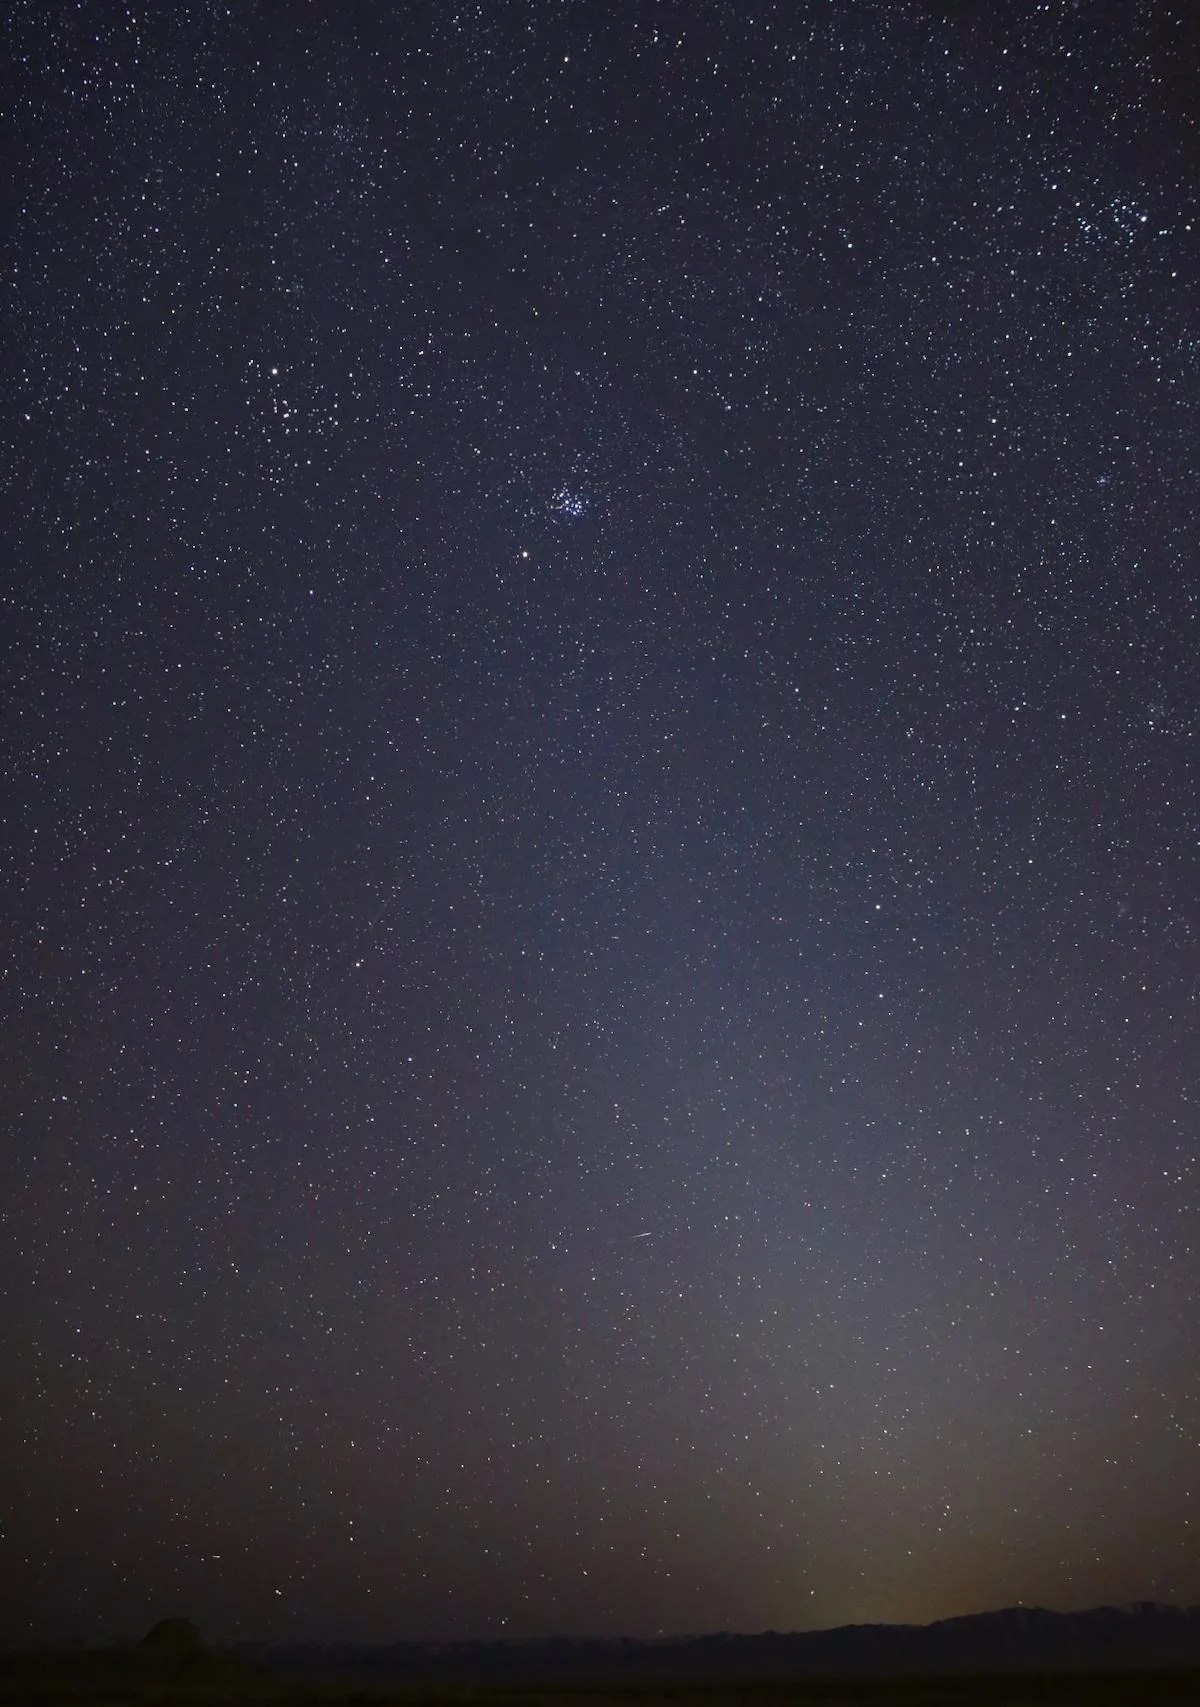 The night sky with a faint band of light that extends from the lower right to the upper left. A slight orange glow is visible along the horizon.